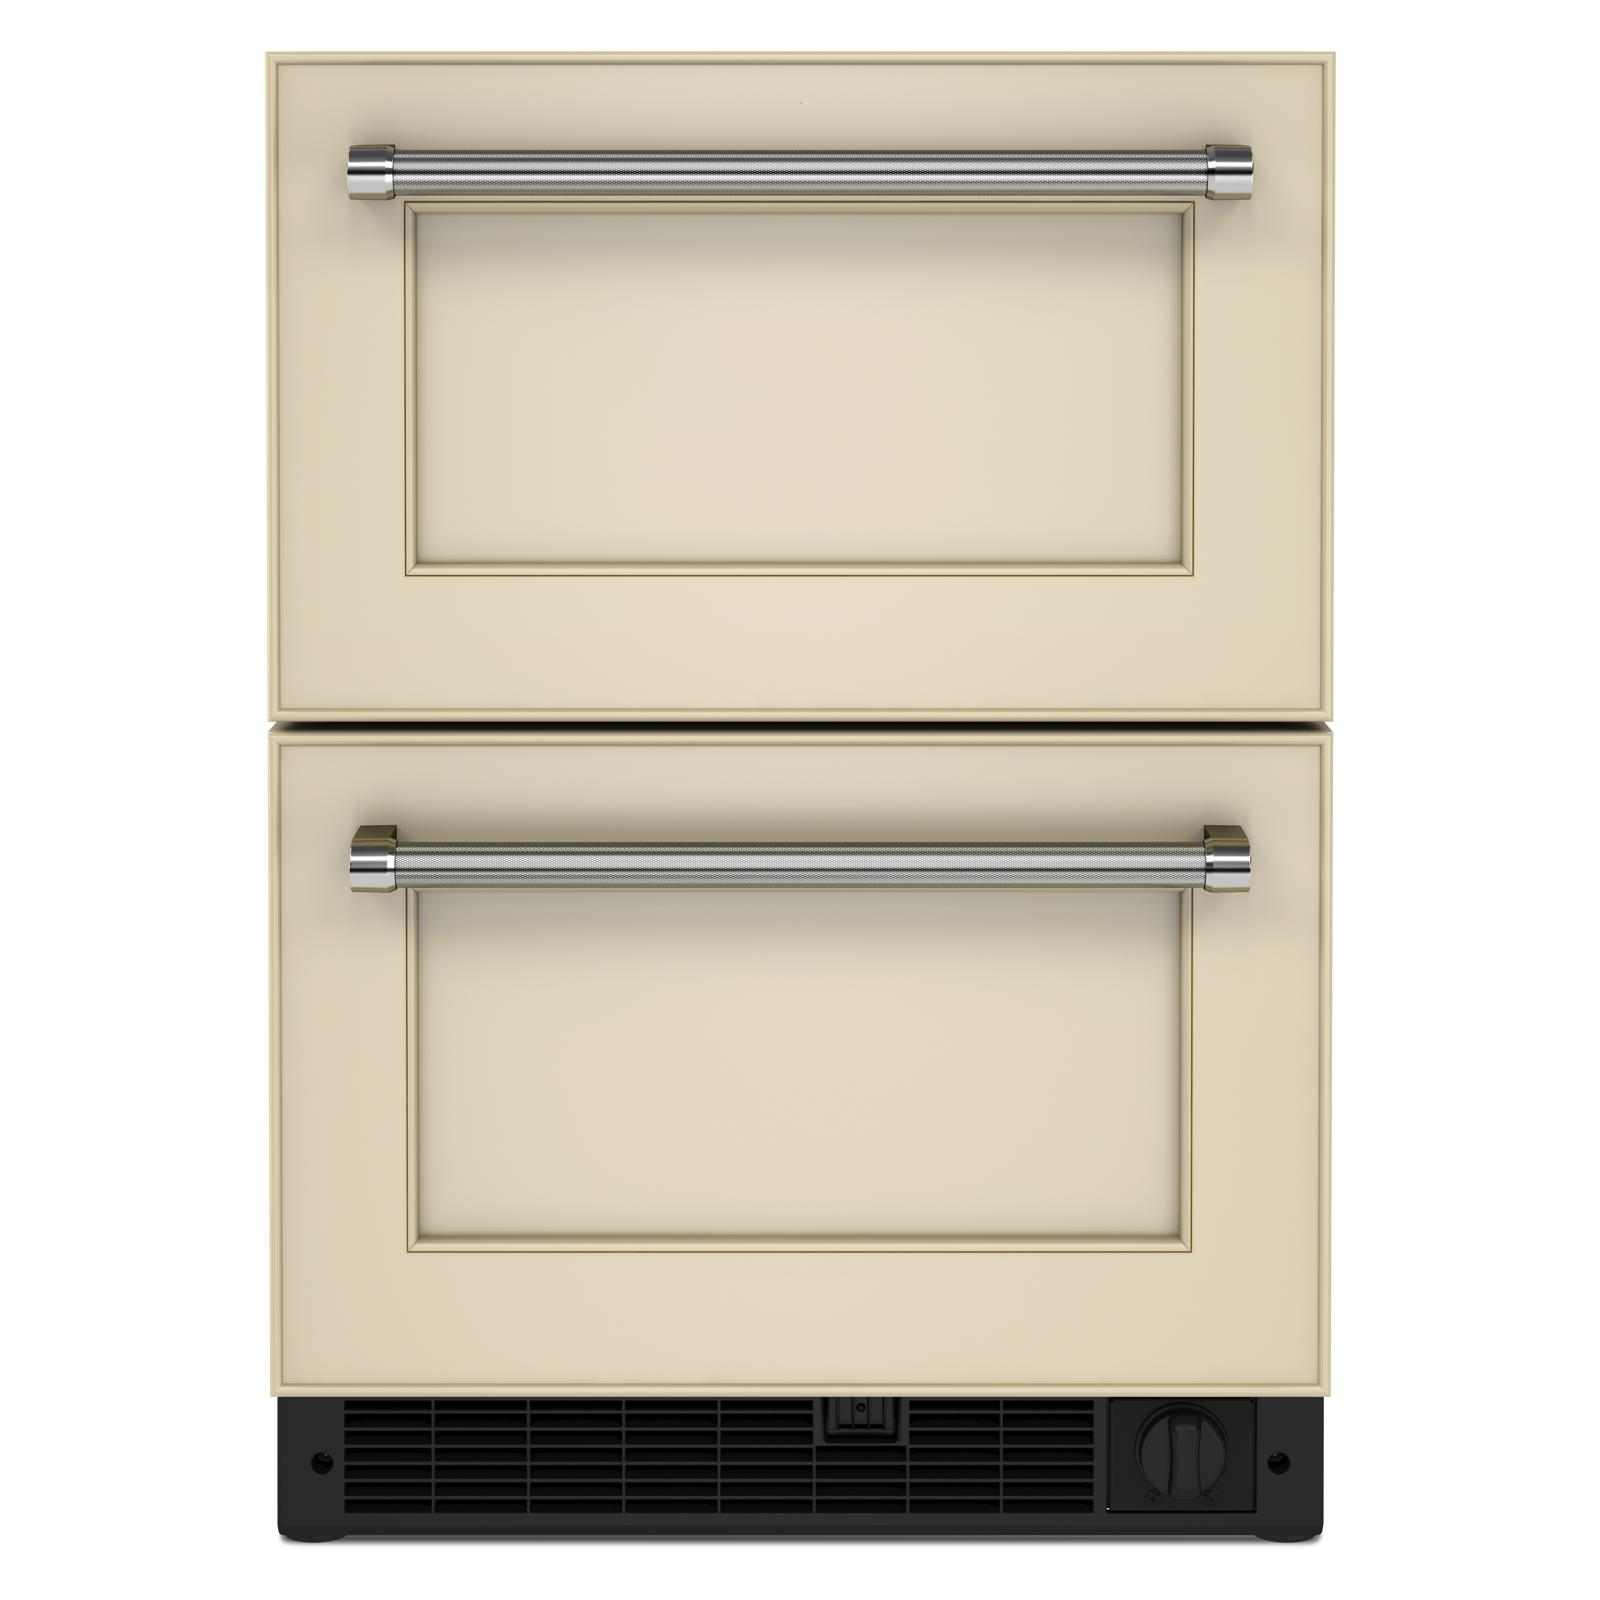 KitchenAid - 23.875 Inch 4.29 cu. ft Undercounter Double-Drawer Refrigerator in Panel Ready - KUDF204KPA